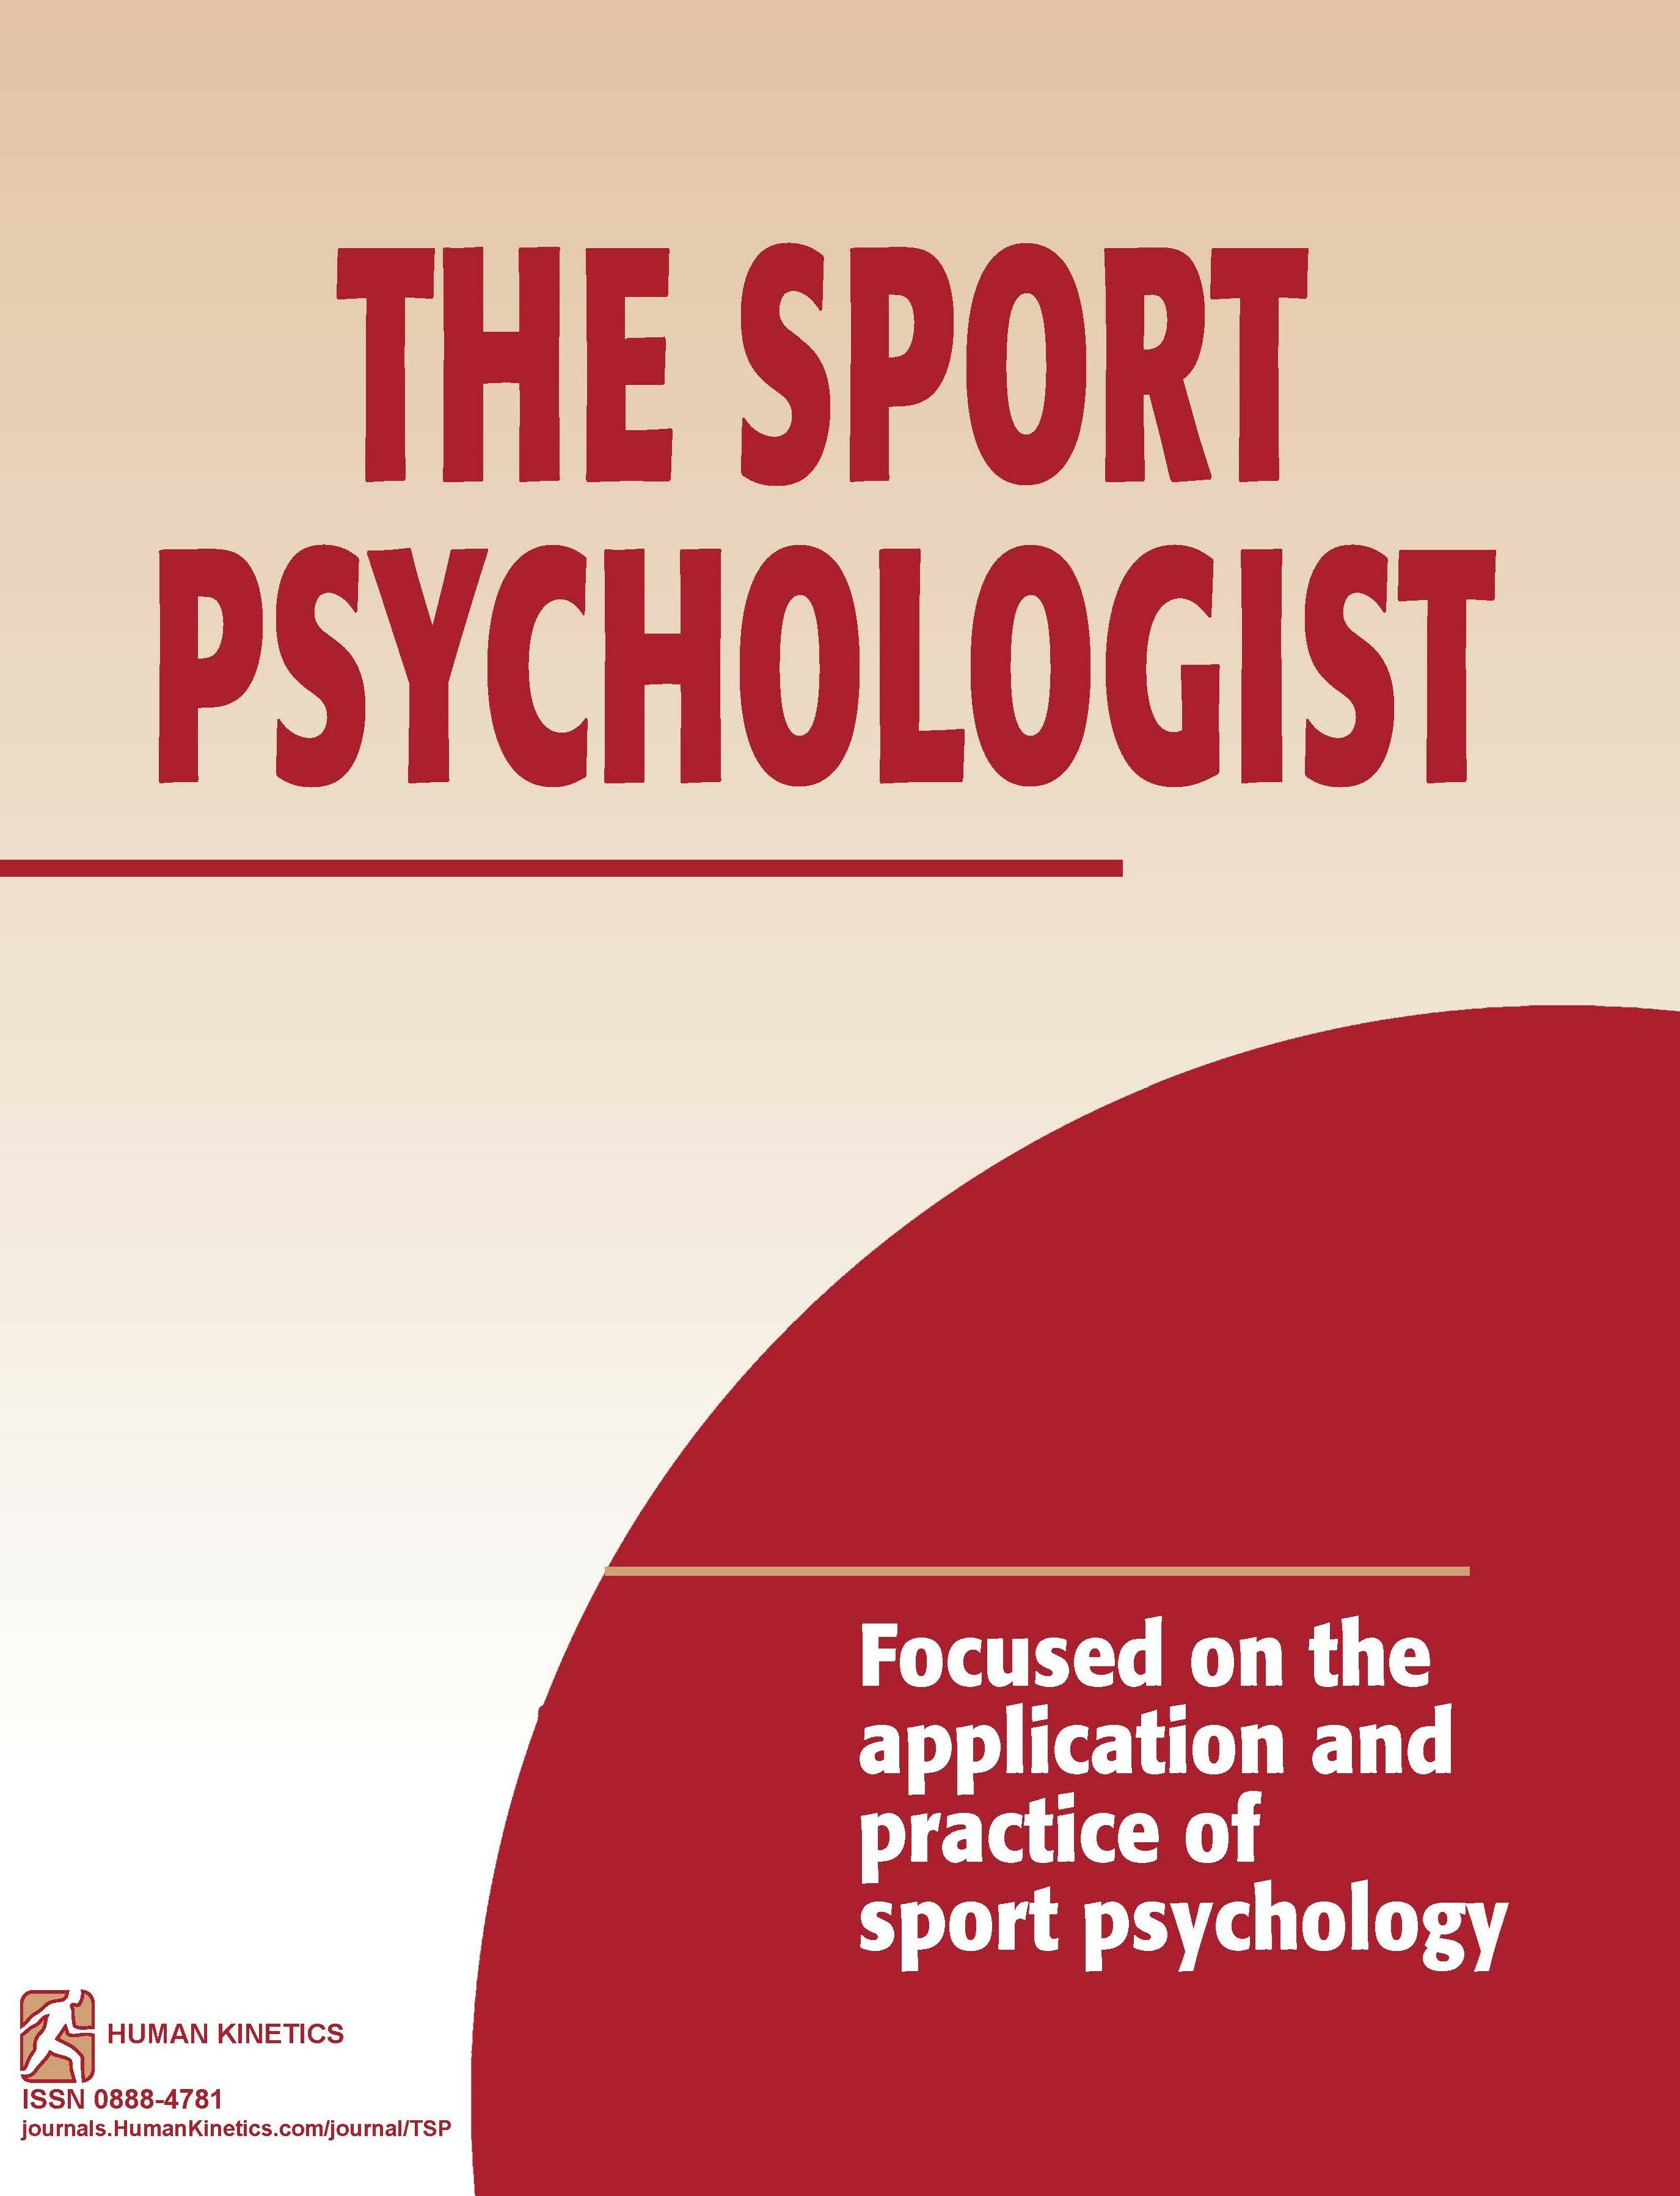 “It’s Absolutely Essential”: Sport and Performance Psychology Practitioners’ Perspectives on Training, Use, and Importance of Debriefing in Applied Work